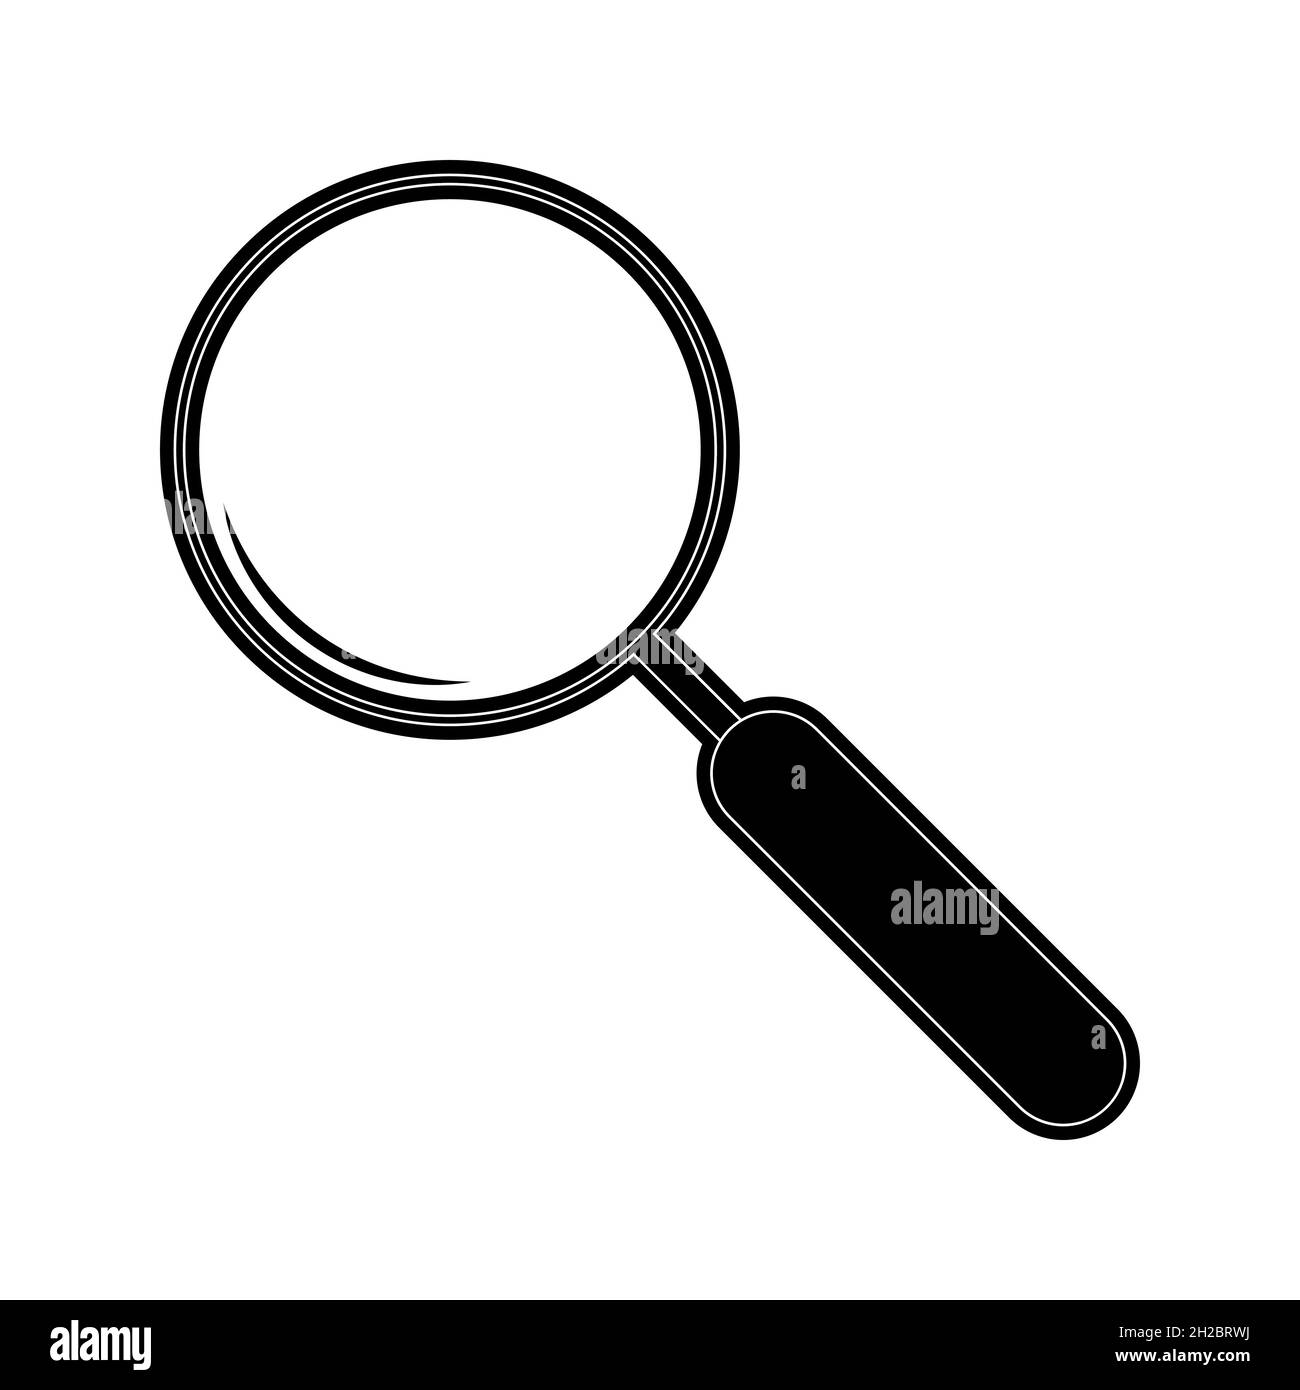 Magnifying glass icon. Magnifier symbol concept search for people to work.  Stock Vector